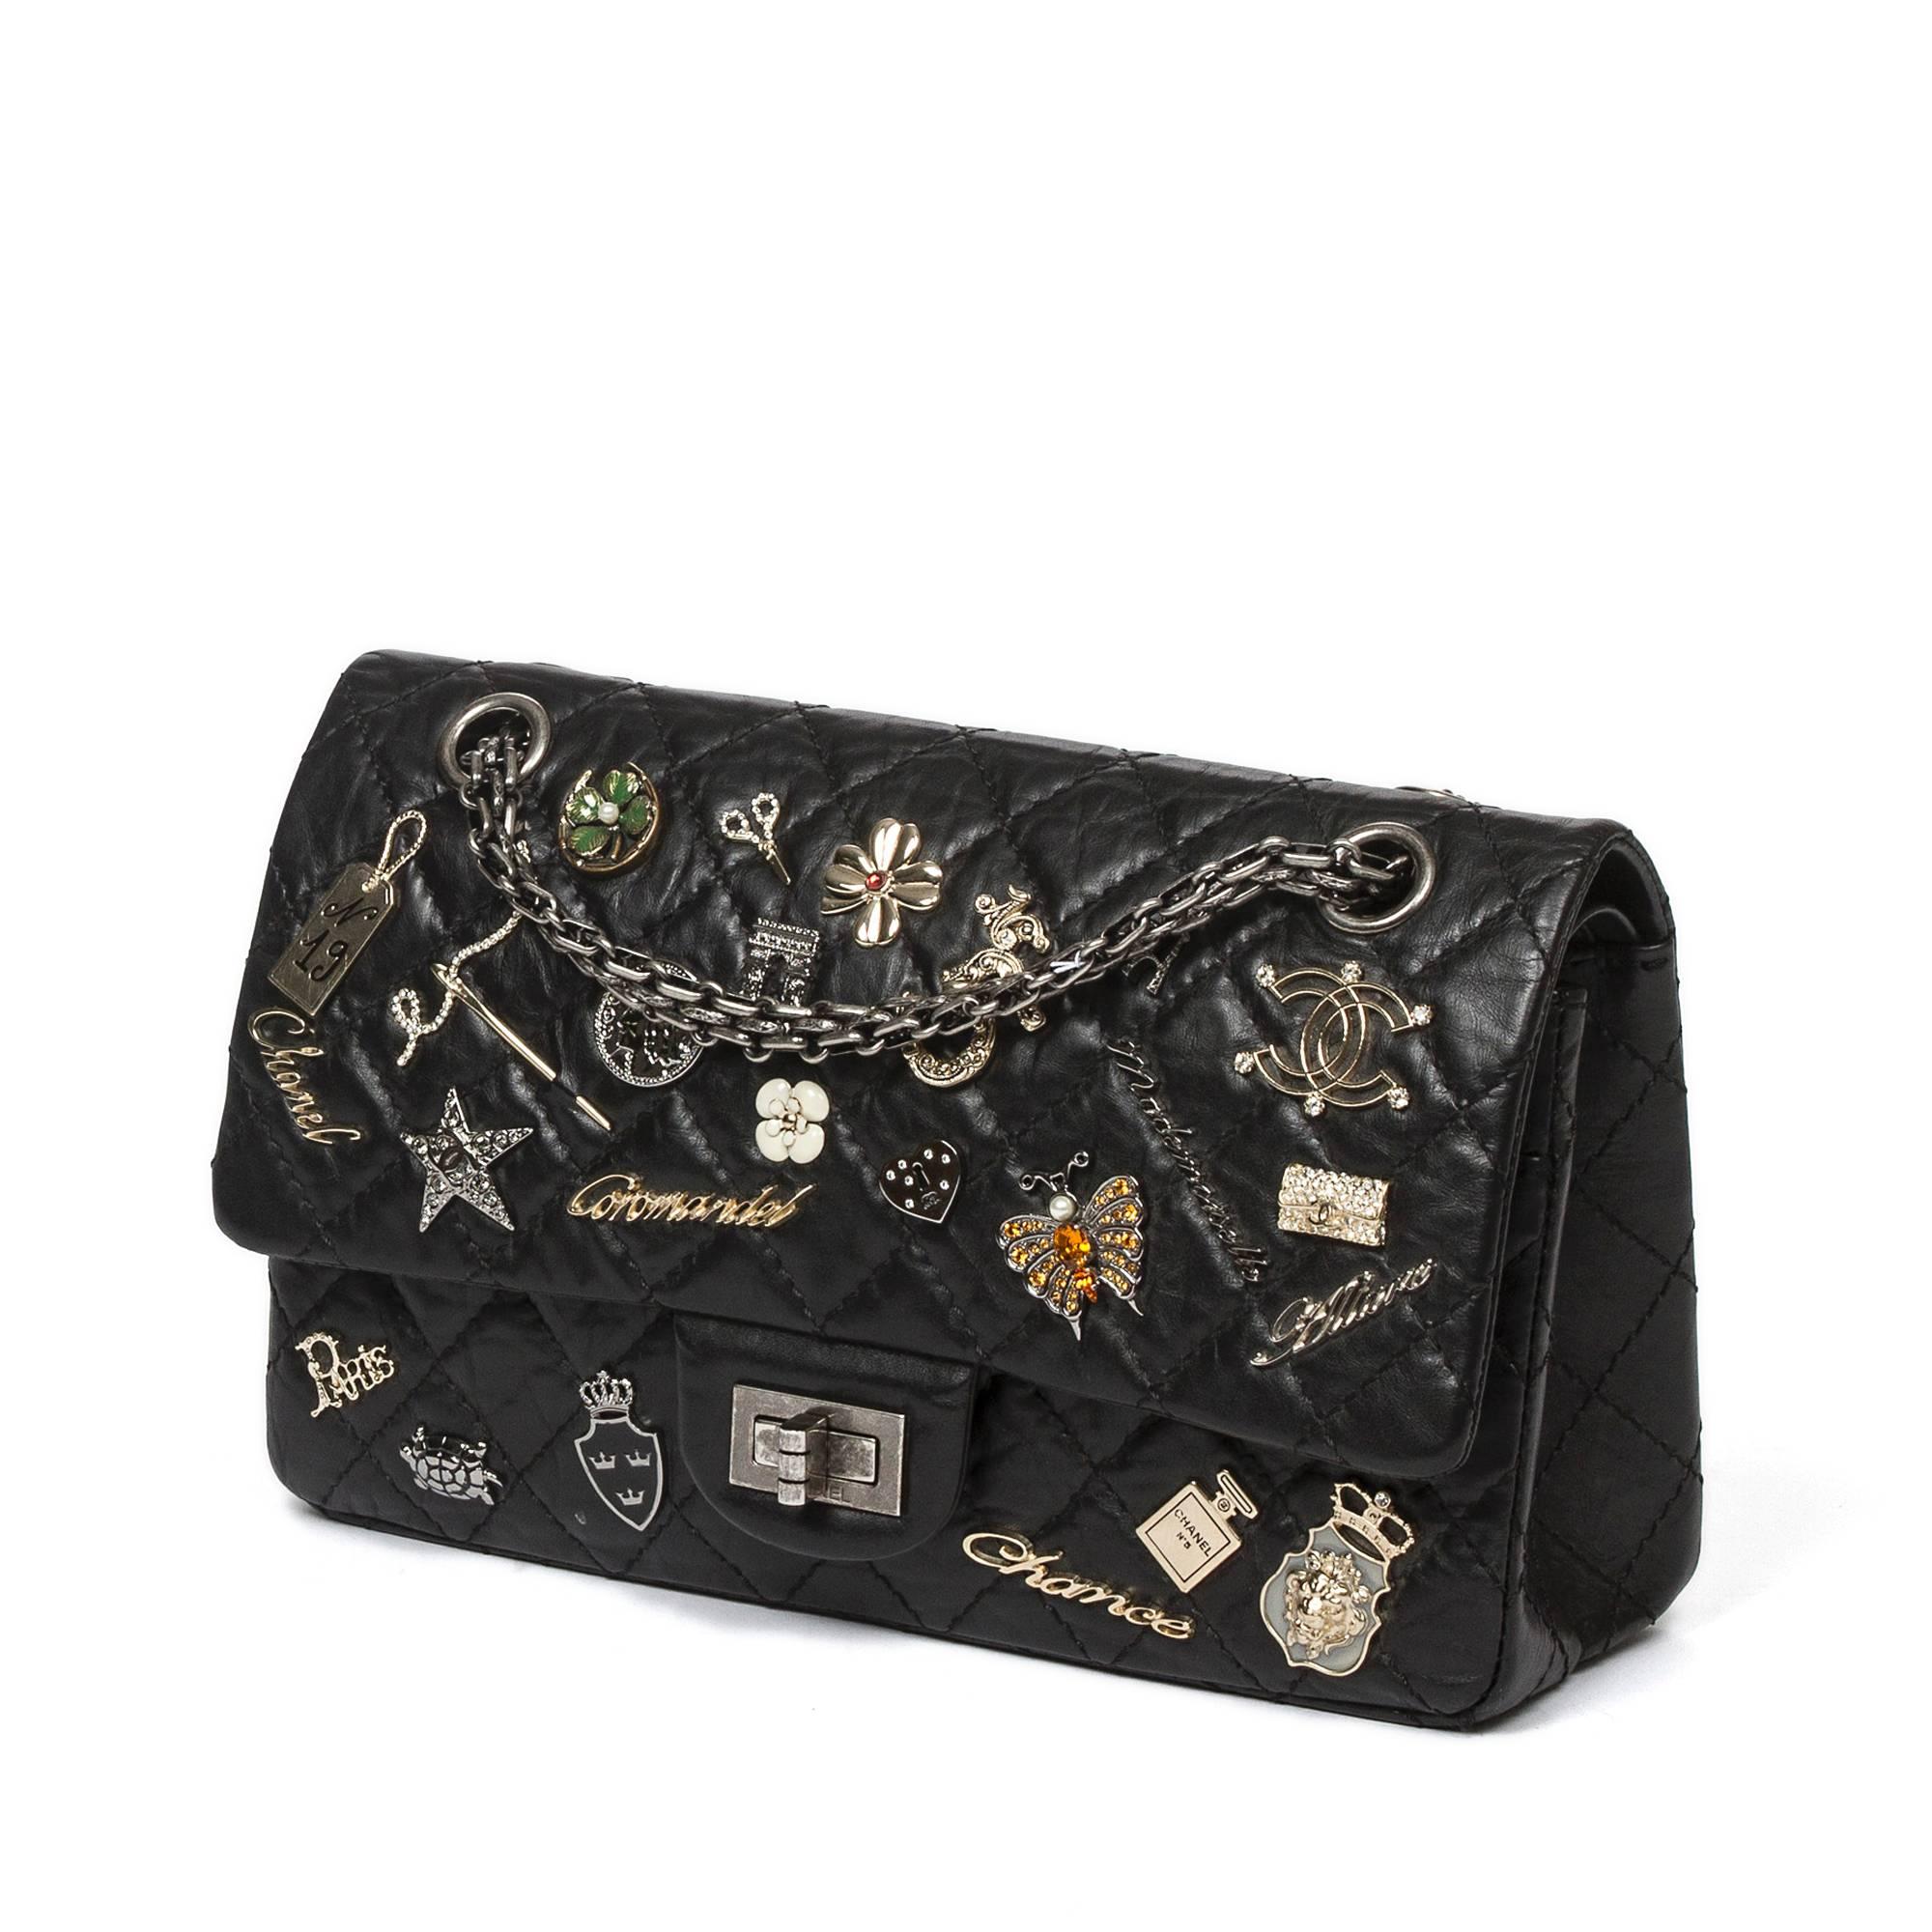 Limited Edition Paris-Bombay 2012 Pre-Fall Collection, Reissue 2.55 Lucky Charm handbag in black distressed leather with classic 